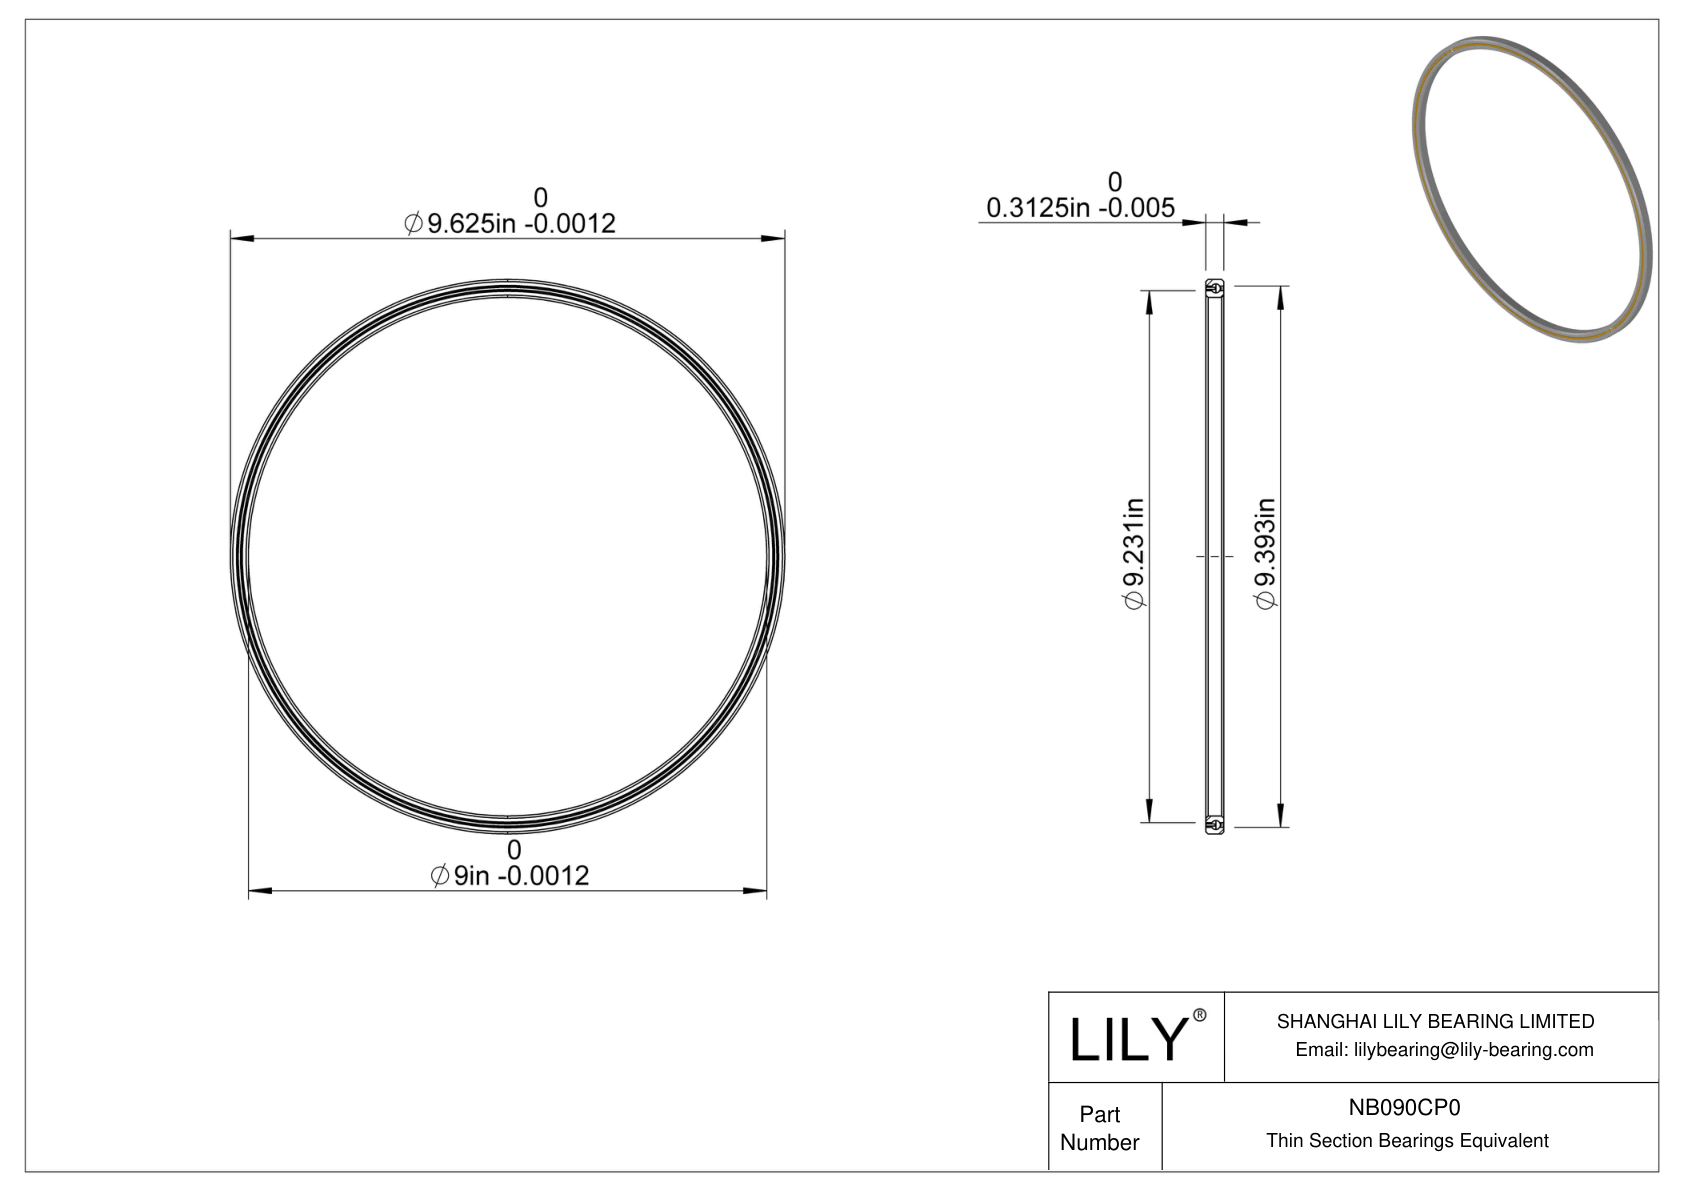 NB090CP0 Constant Section (CS) Bearings cad drawing